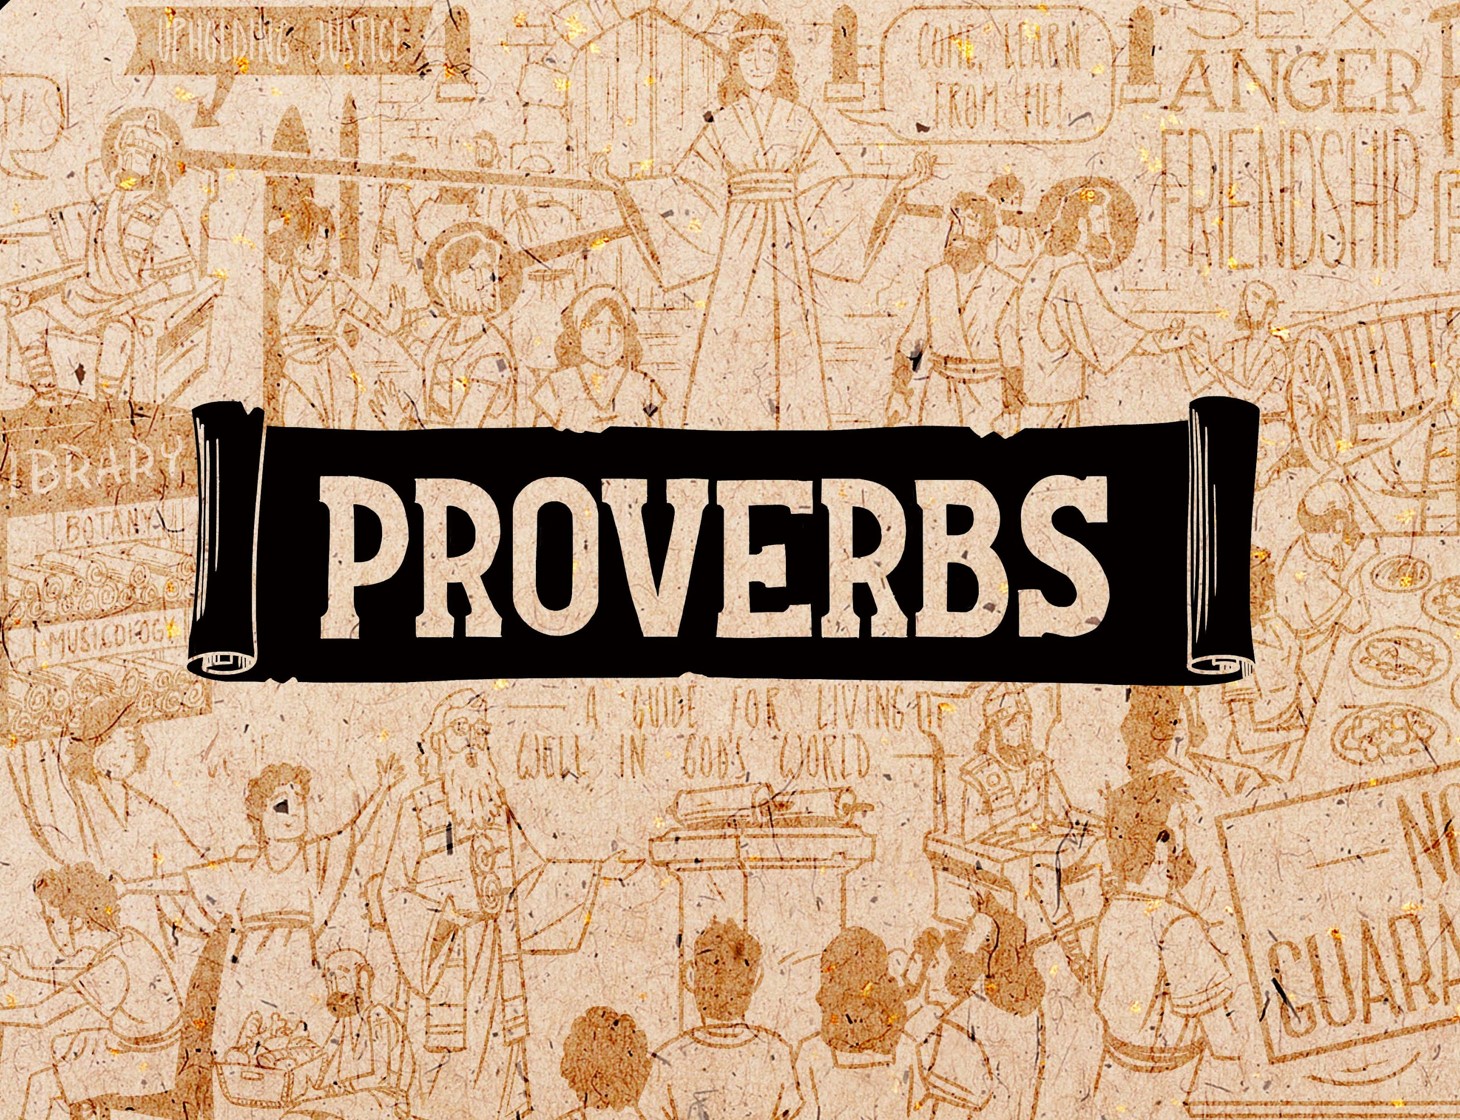 One Word Substitutions, Proverbs, Facts and Opinions